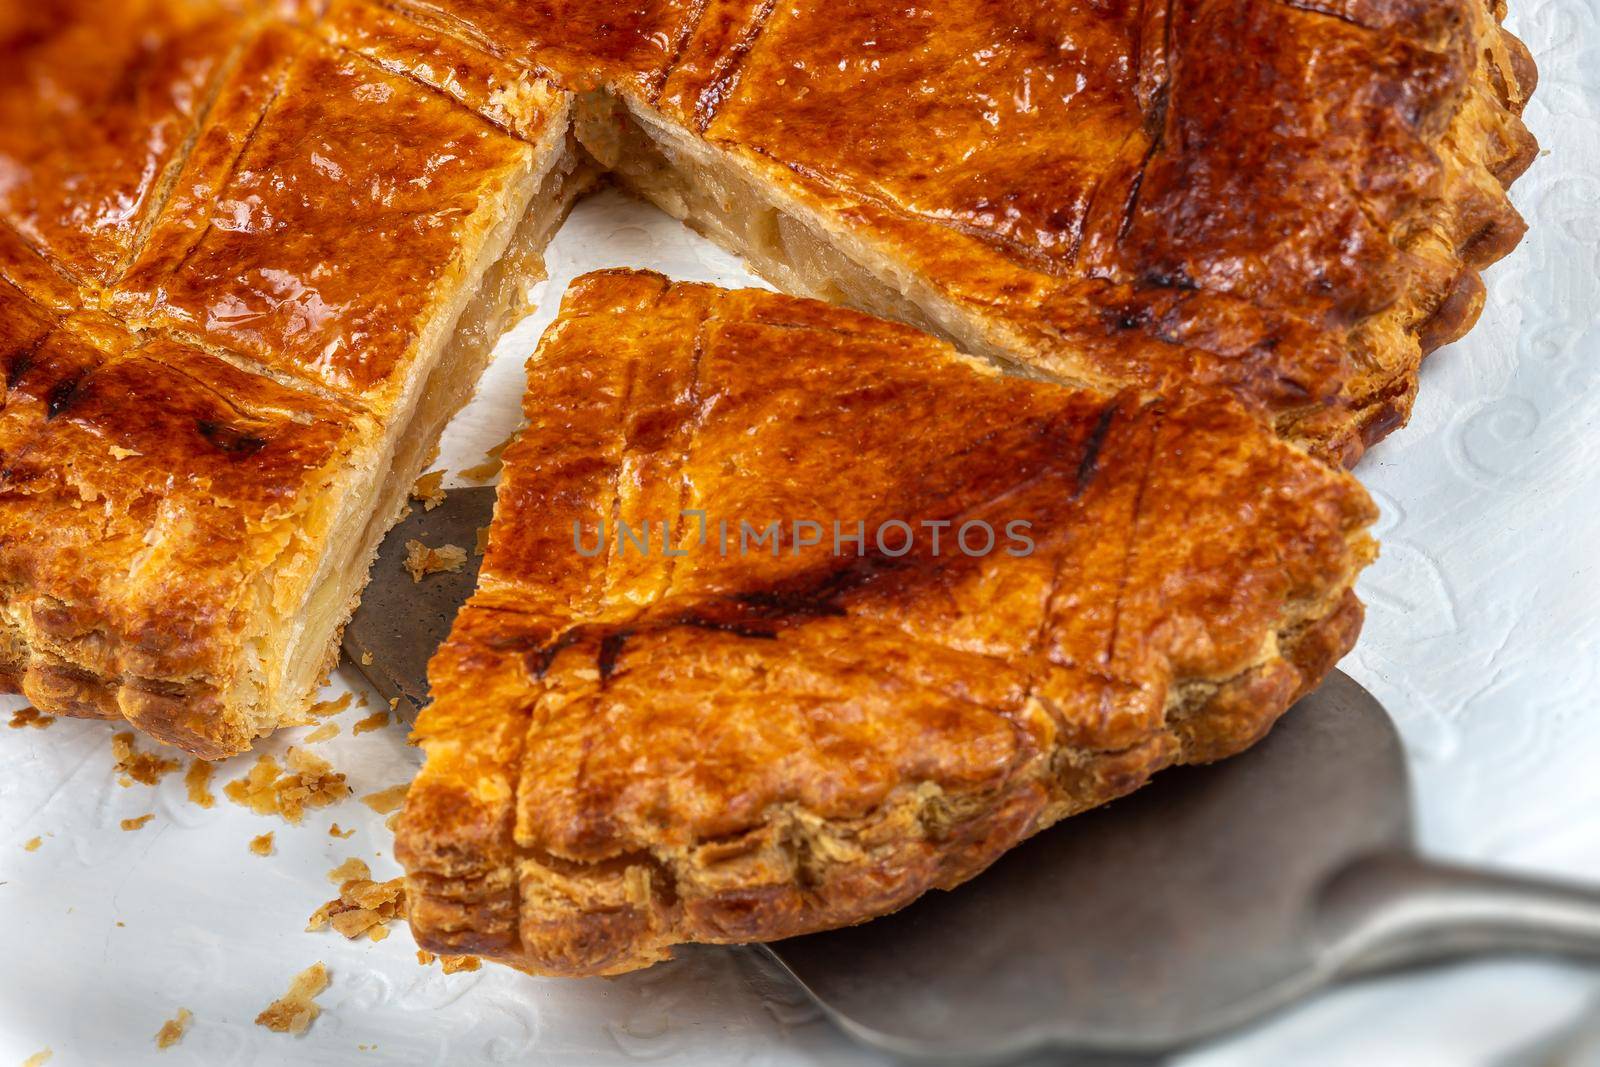 Slice of cake in close-up with pie shovel